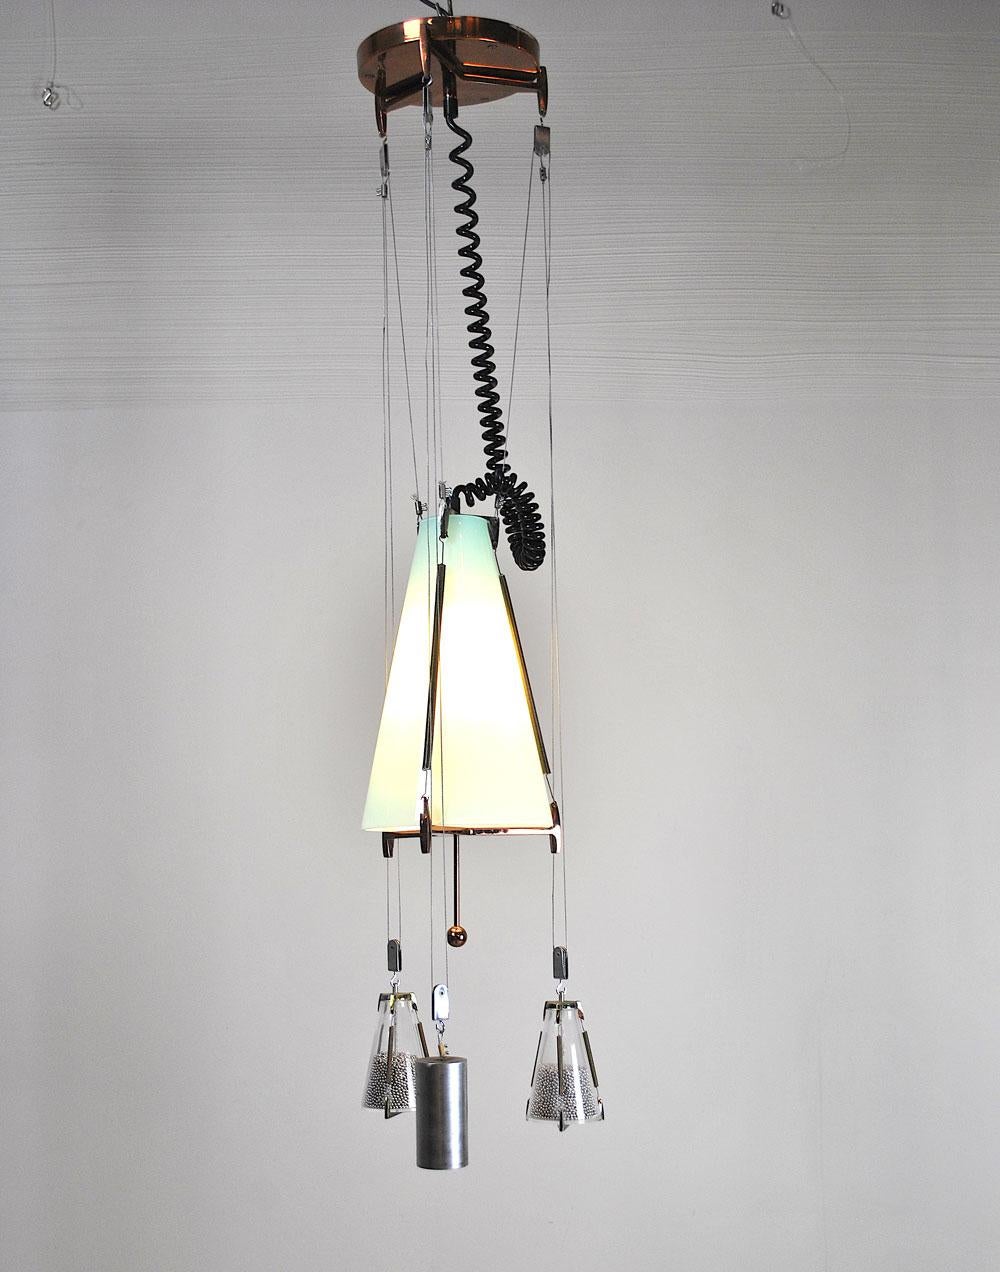 Italian Midcentury Chandelier in the Atomic Style from the 1950s In Good Condition For Sale In bari, IT